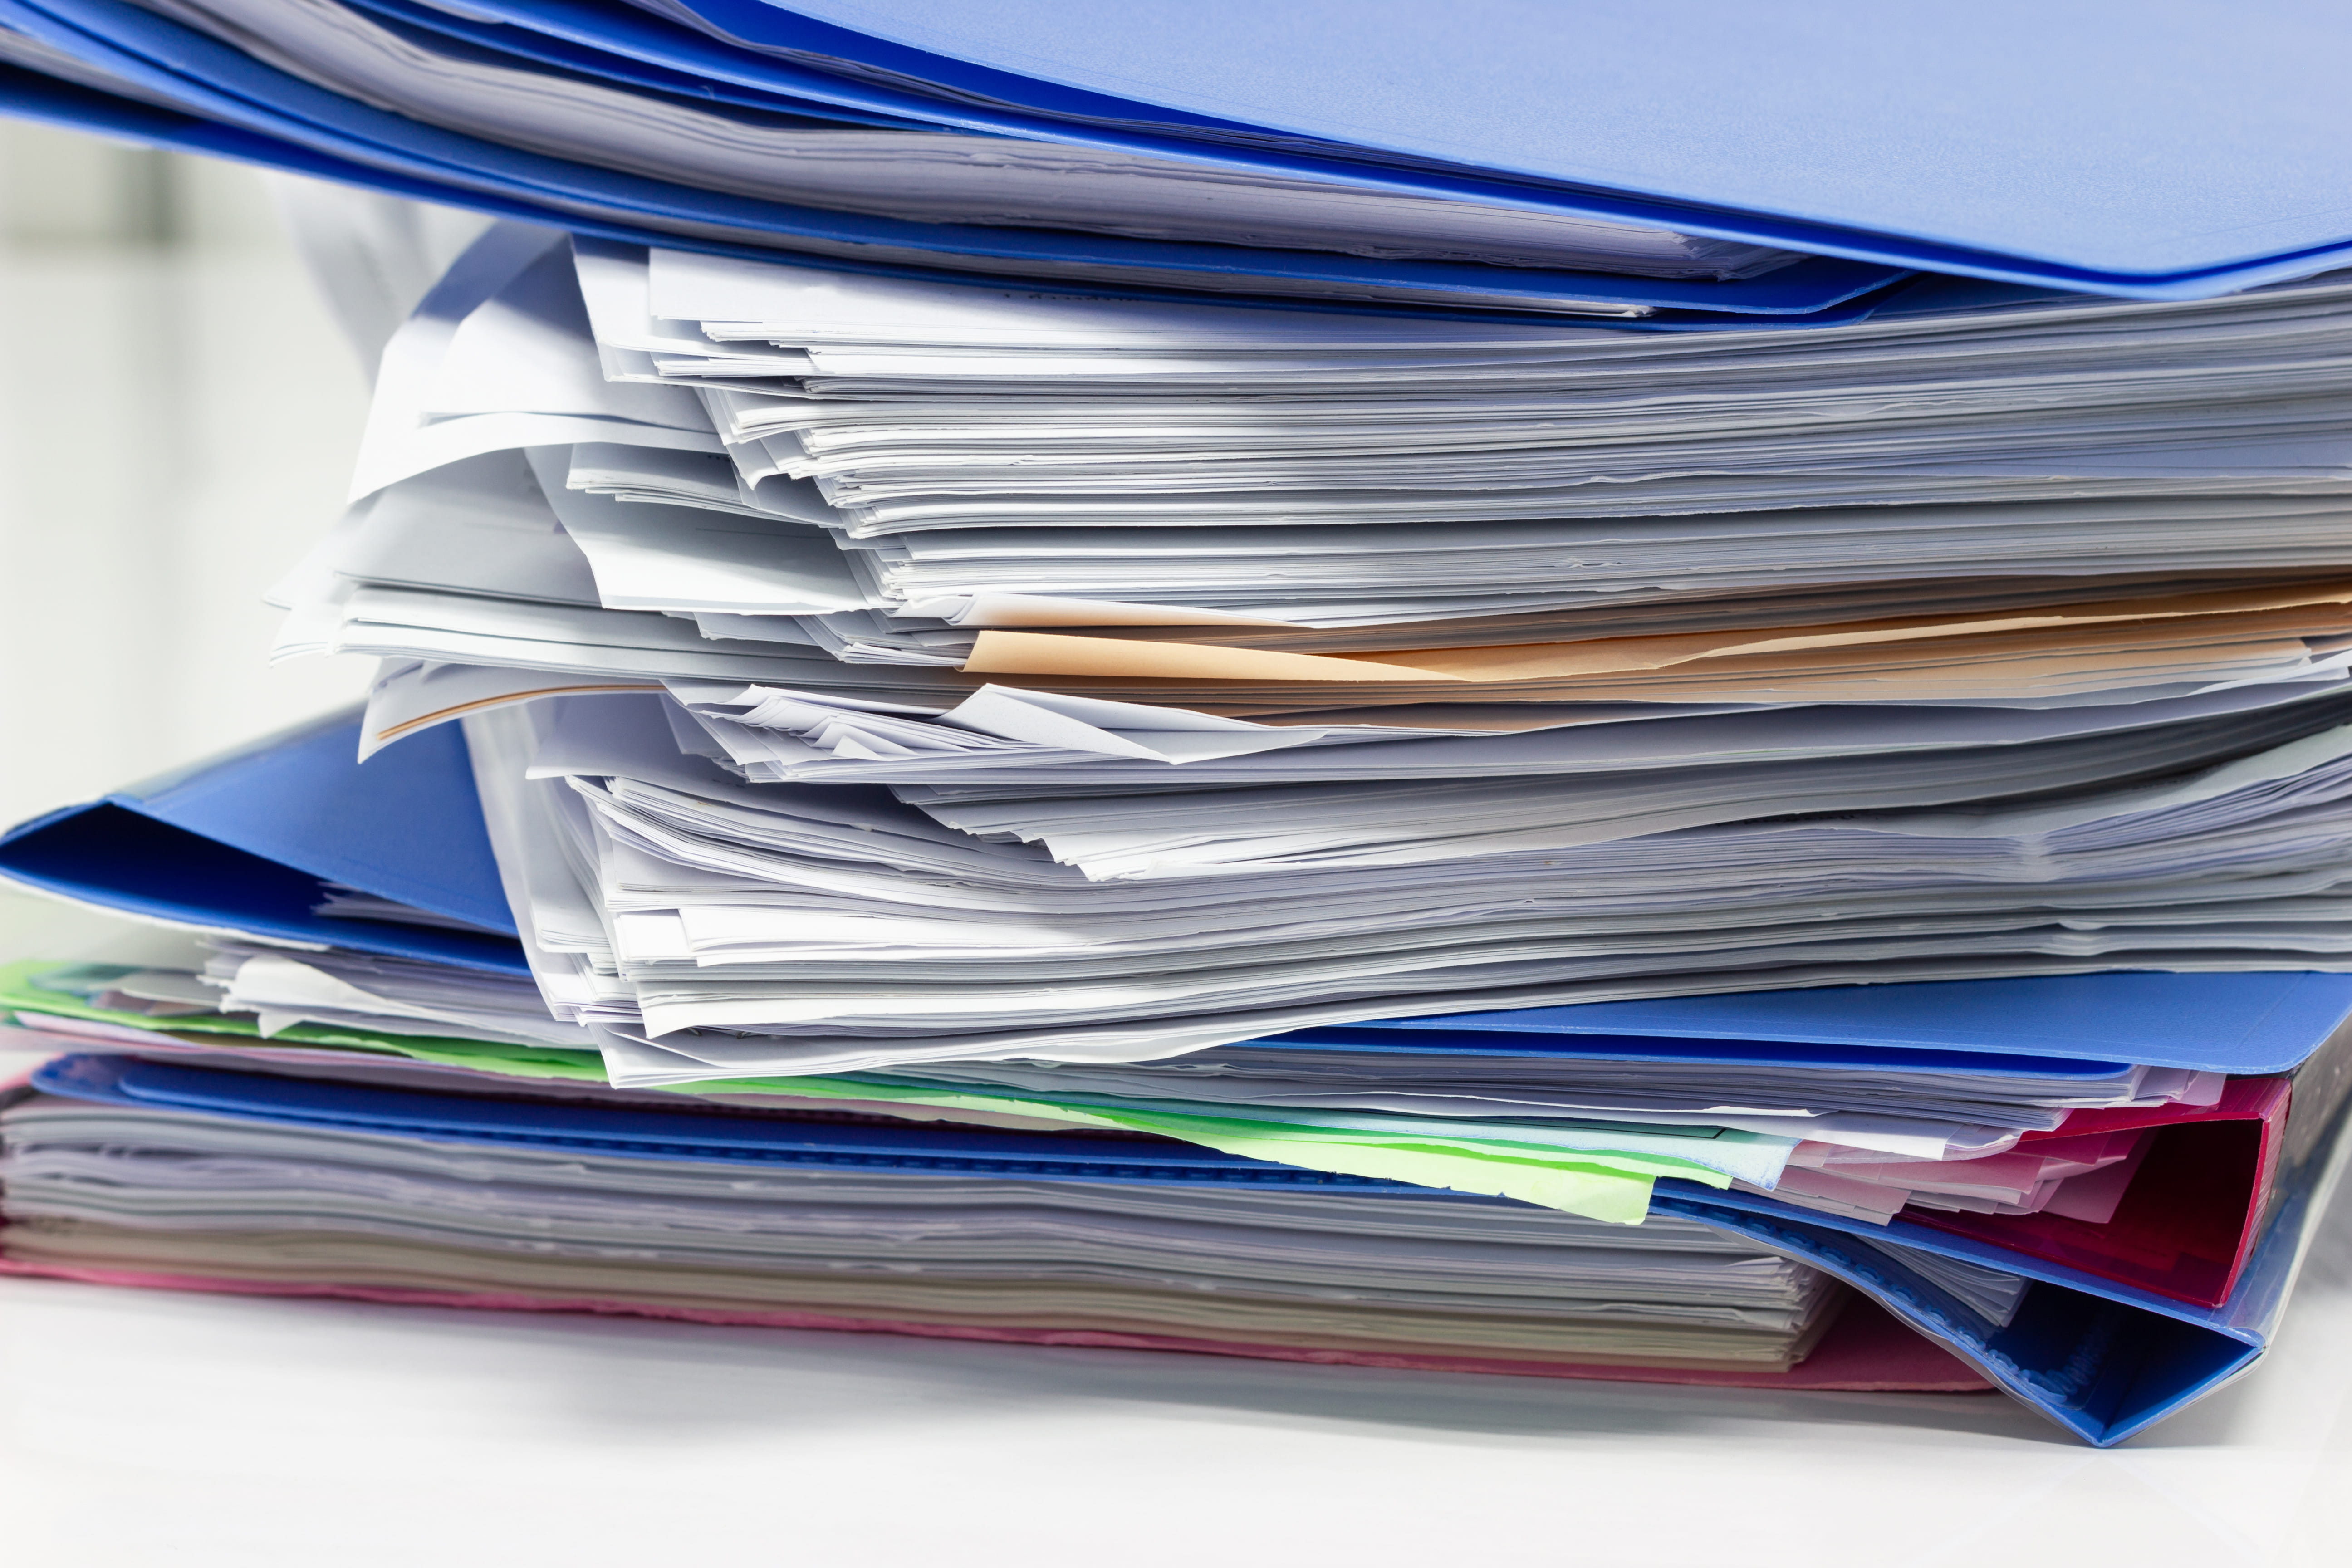 Stacks of files with paper invoices like this are a thing of the past with an automated procurement solution